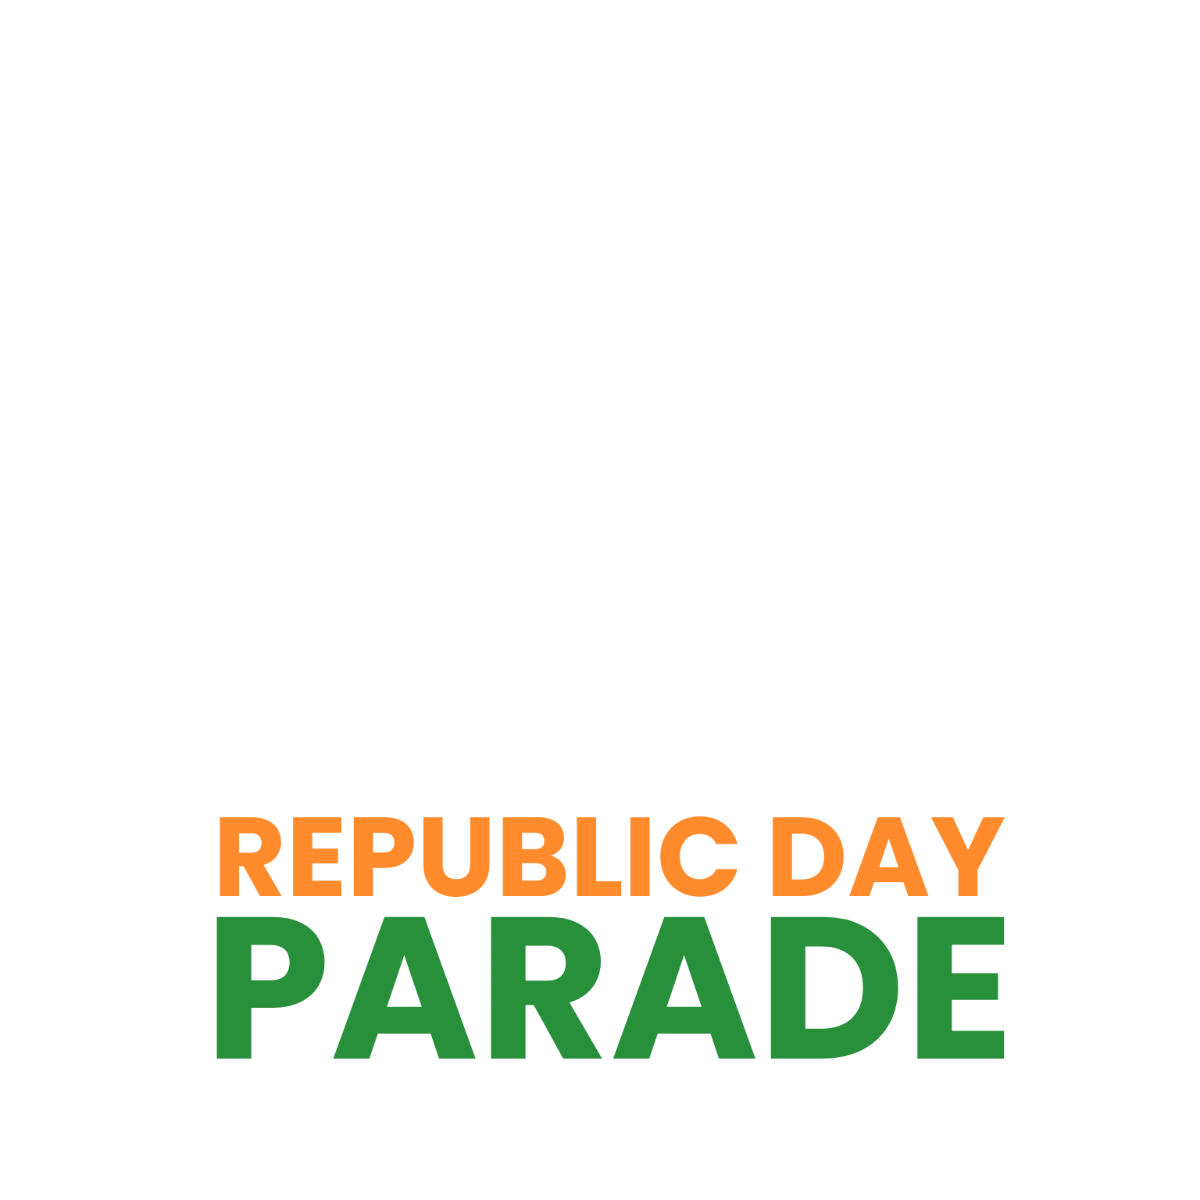 Free Republic Day Parade Clipart Template